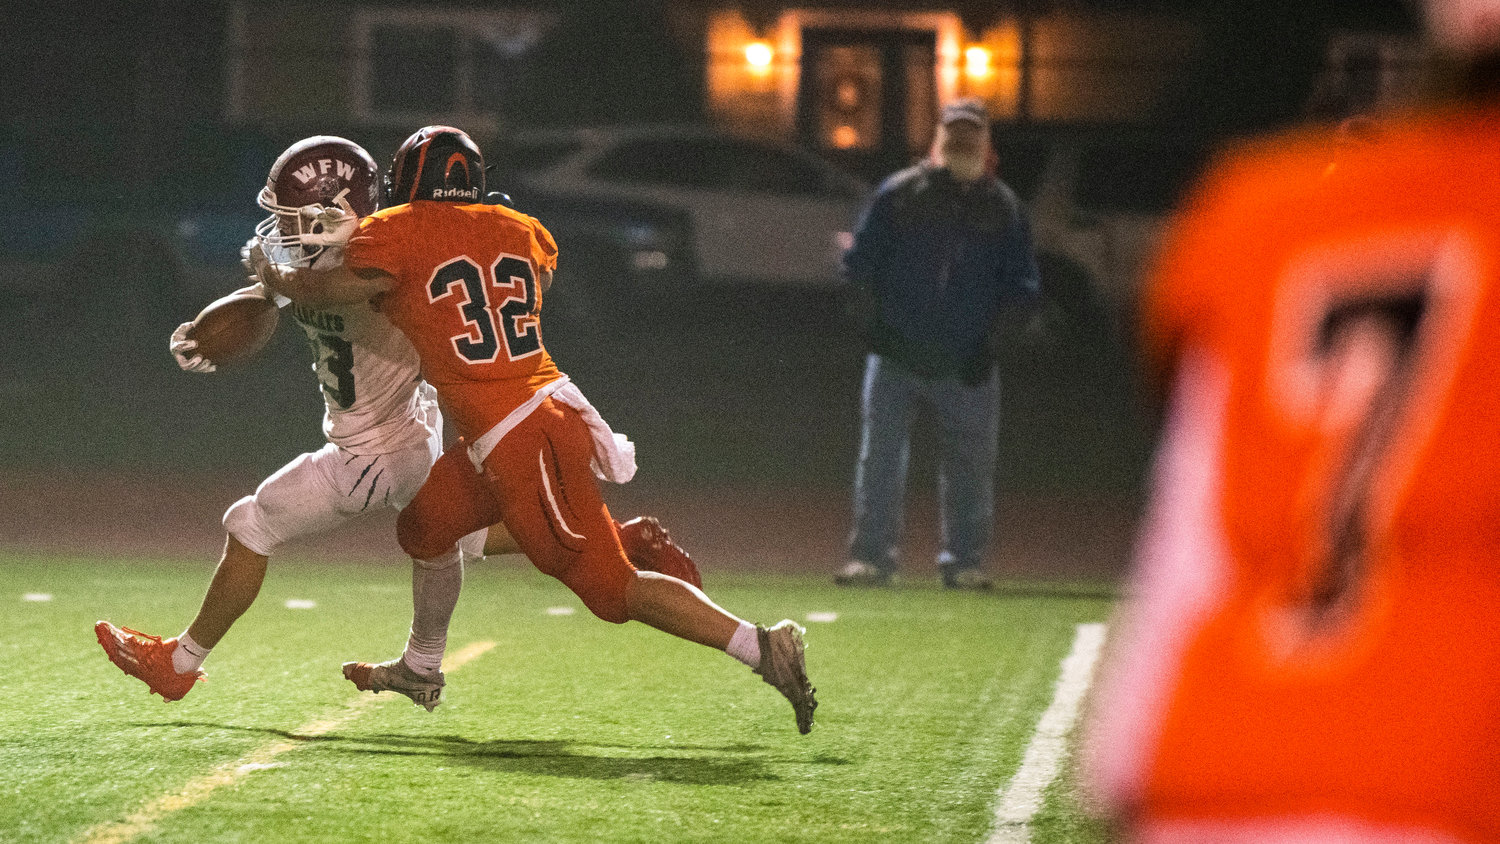 W.F. West senior Evan Stajduhar (23) runs through Tigers with the football during a Friday night game in Centralia.